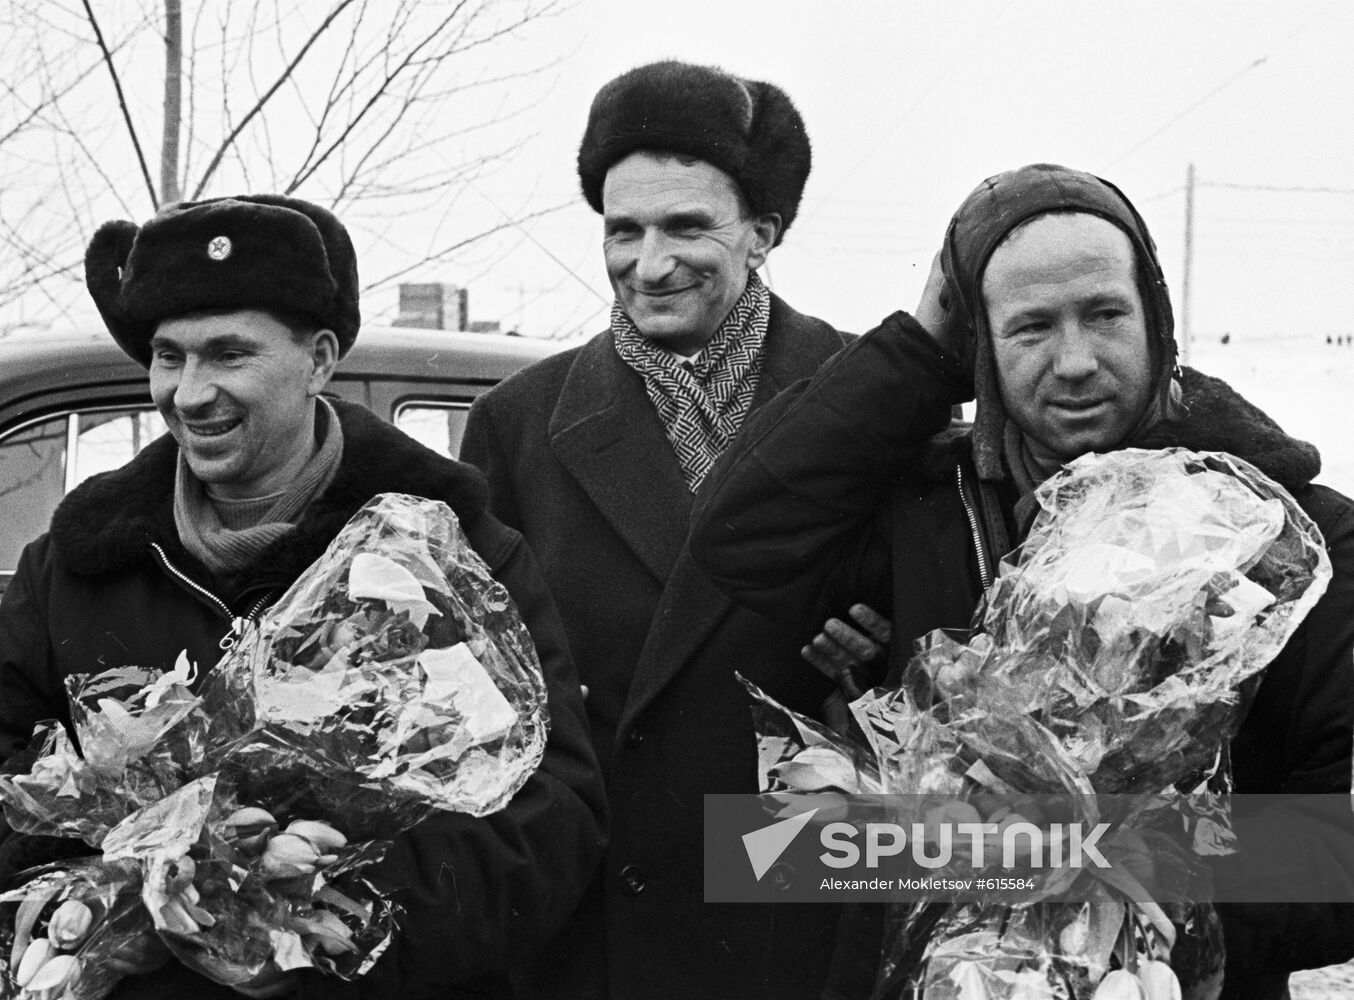 Pilot-cosmonauts Alexey Leonov and Pavel Belyayev visit Perm after space mission